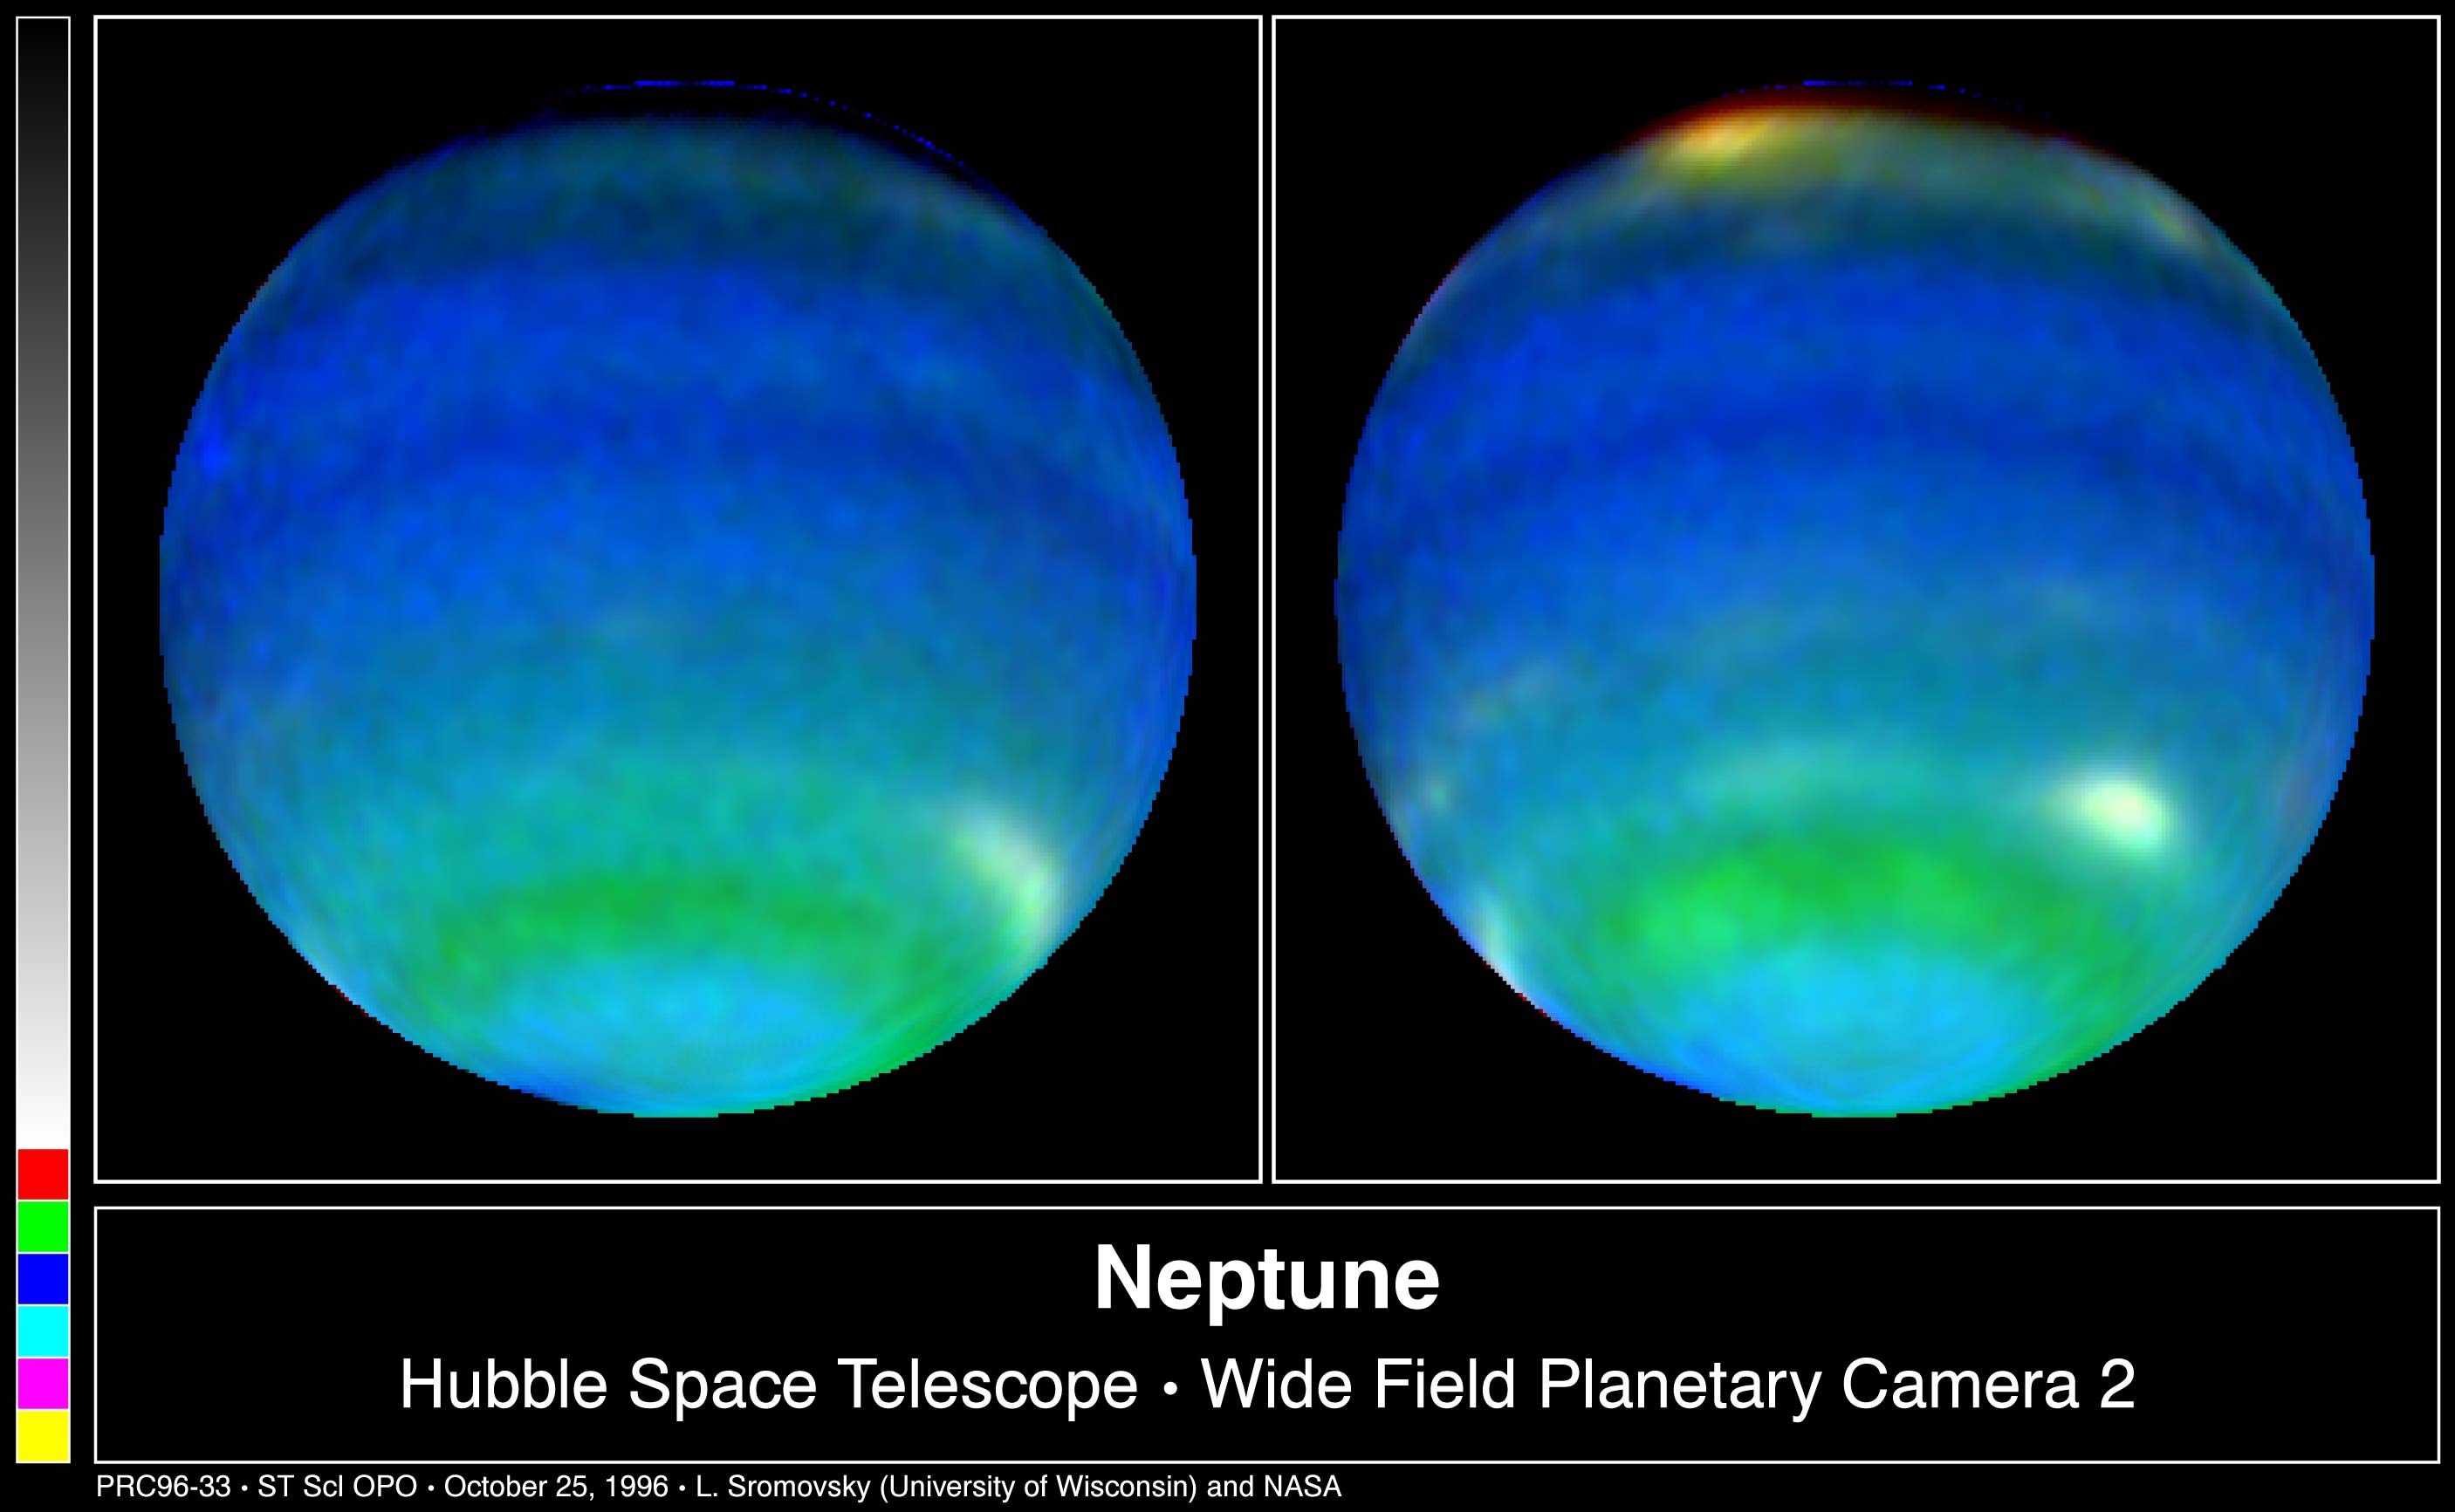 The Weather on Neptune